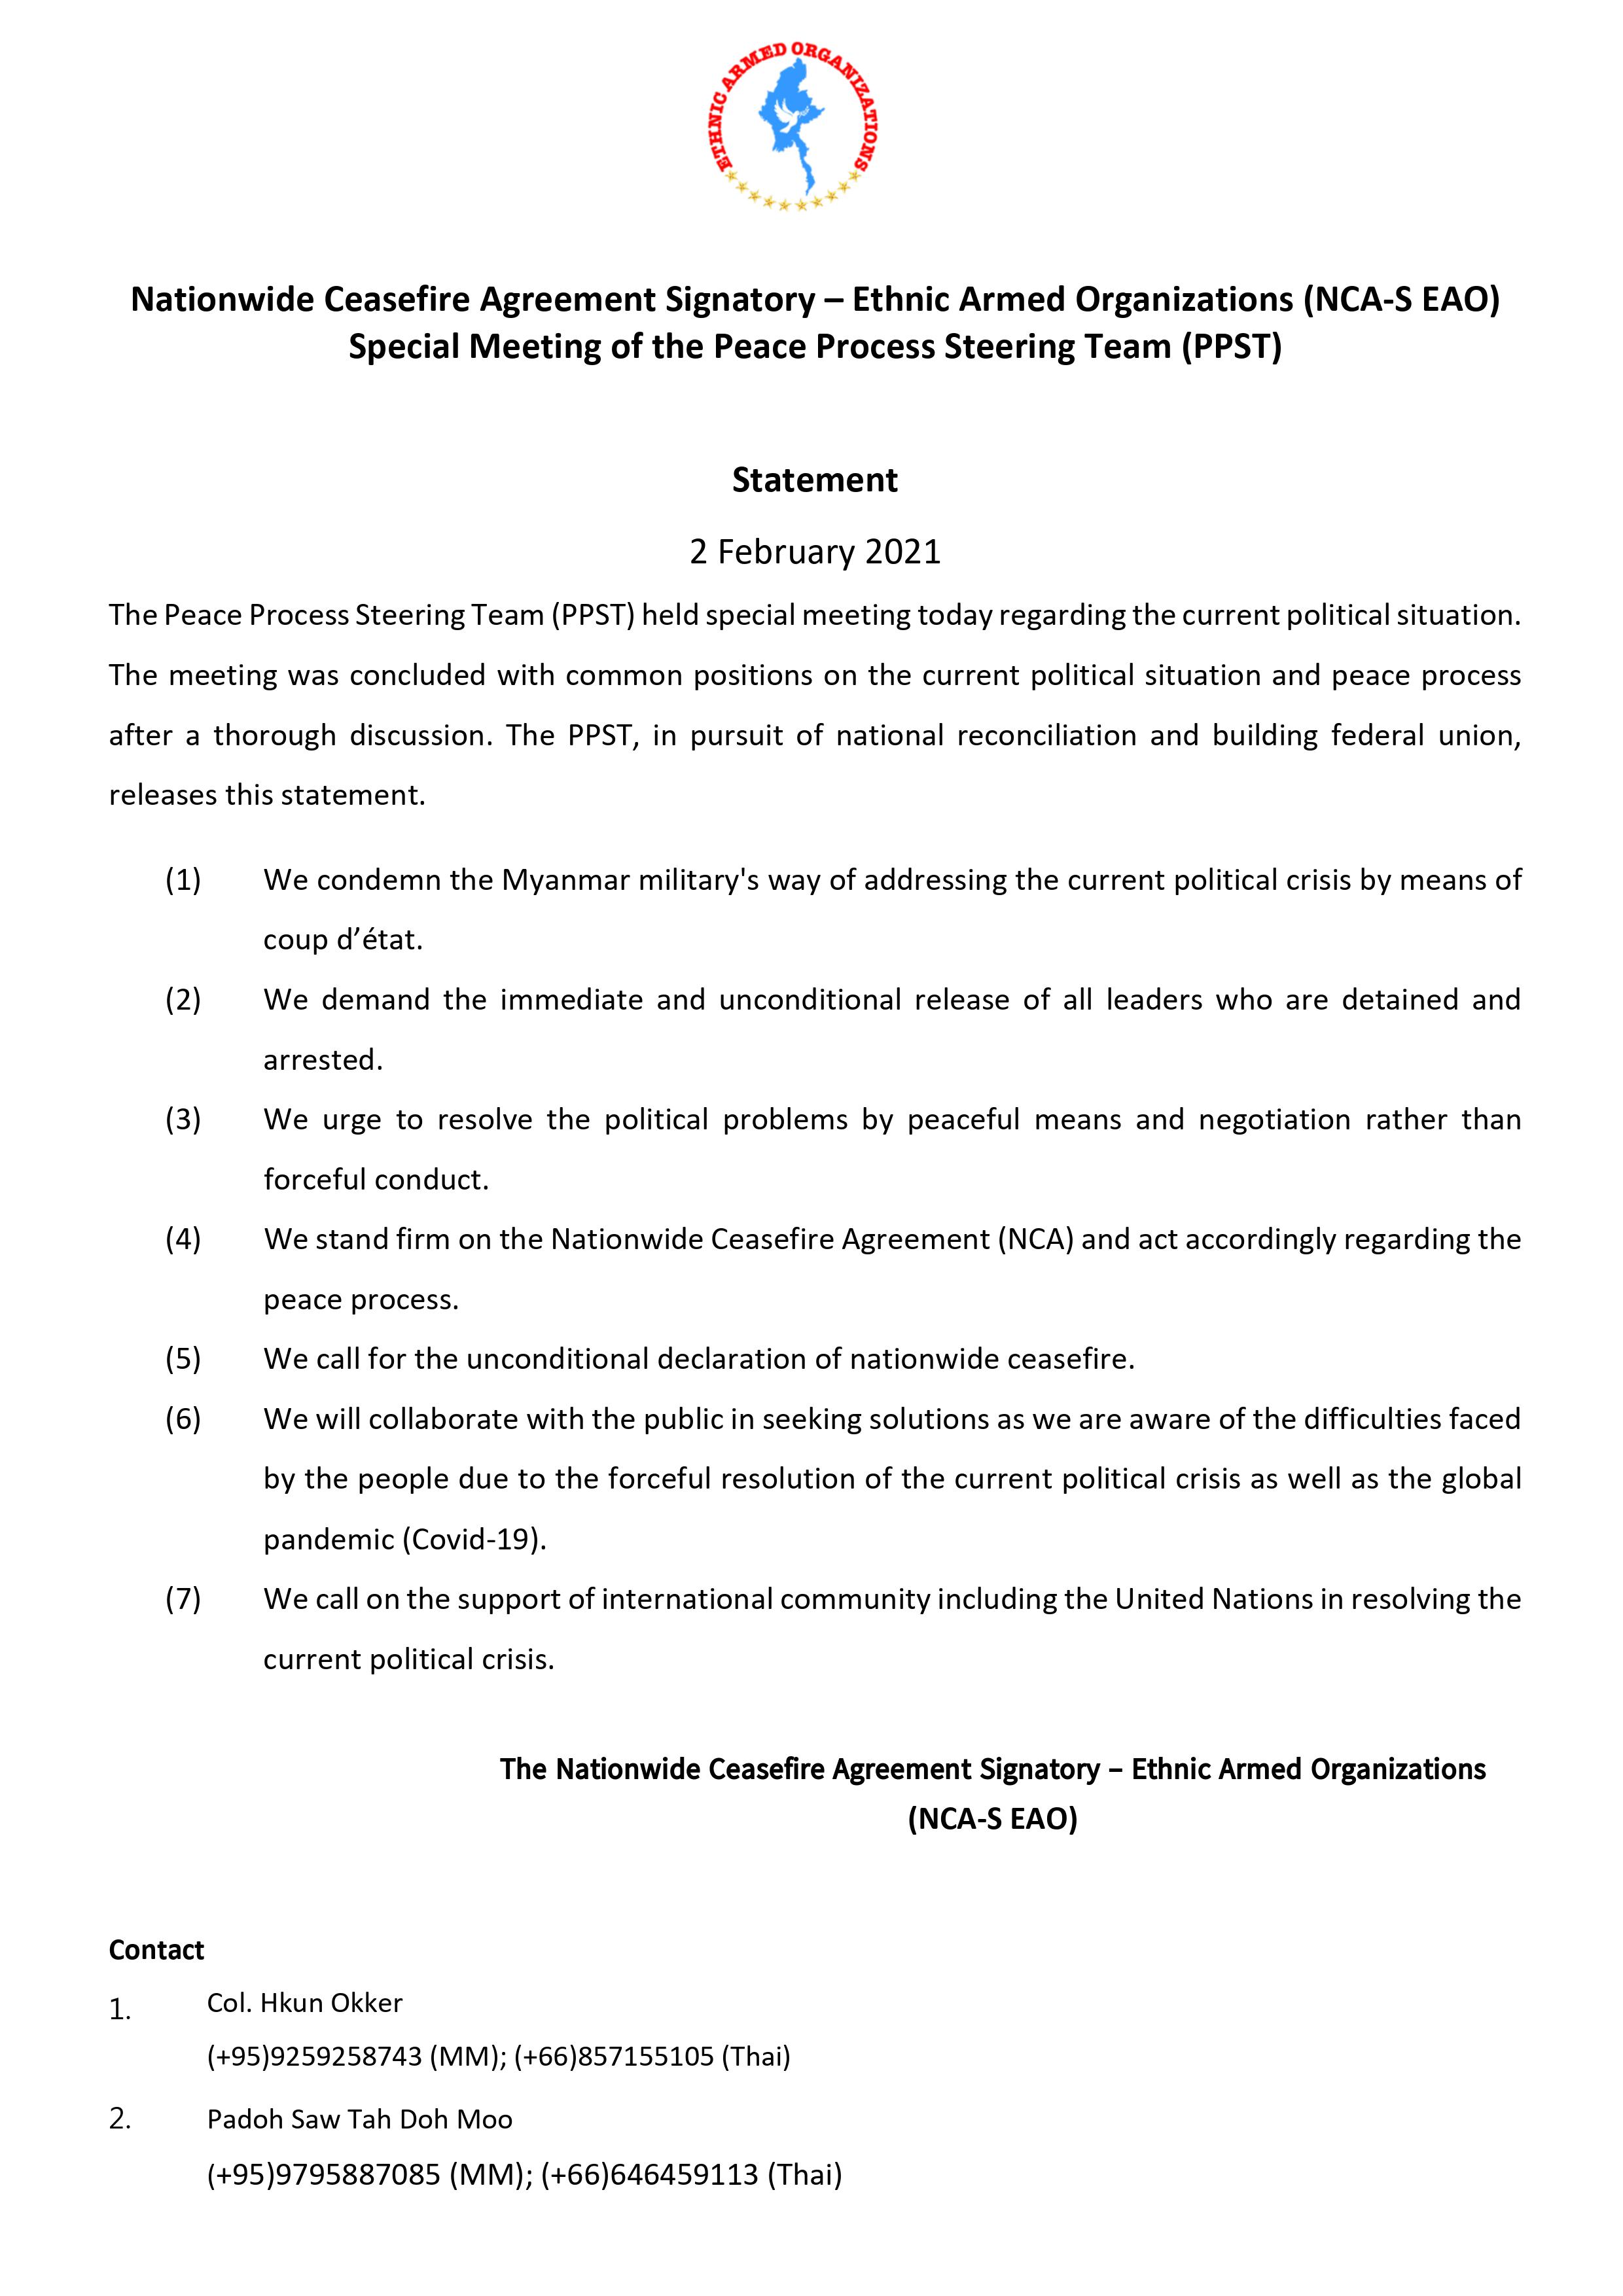 The Statement of Special Meeting of the Peace Process Steering Team (PPST)